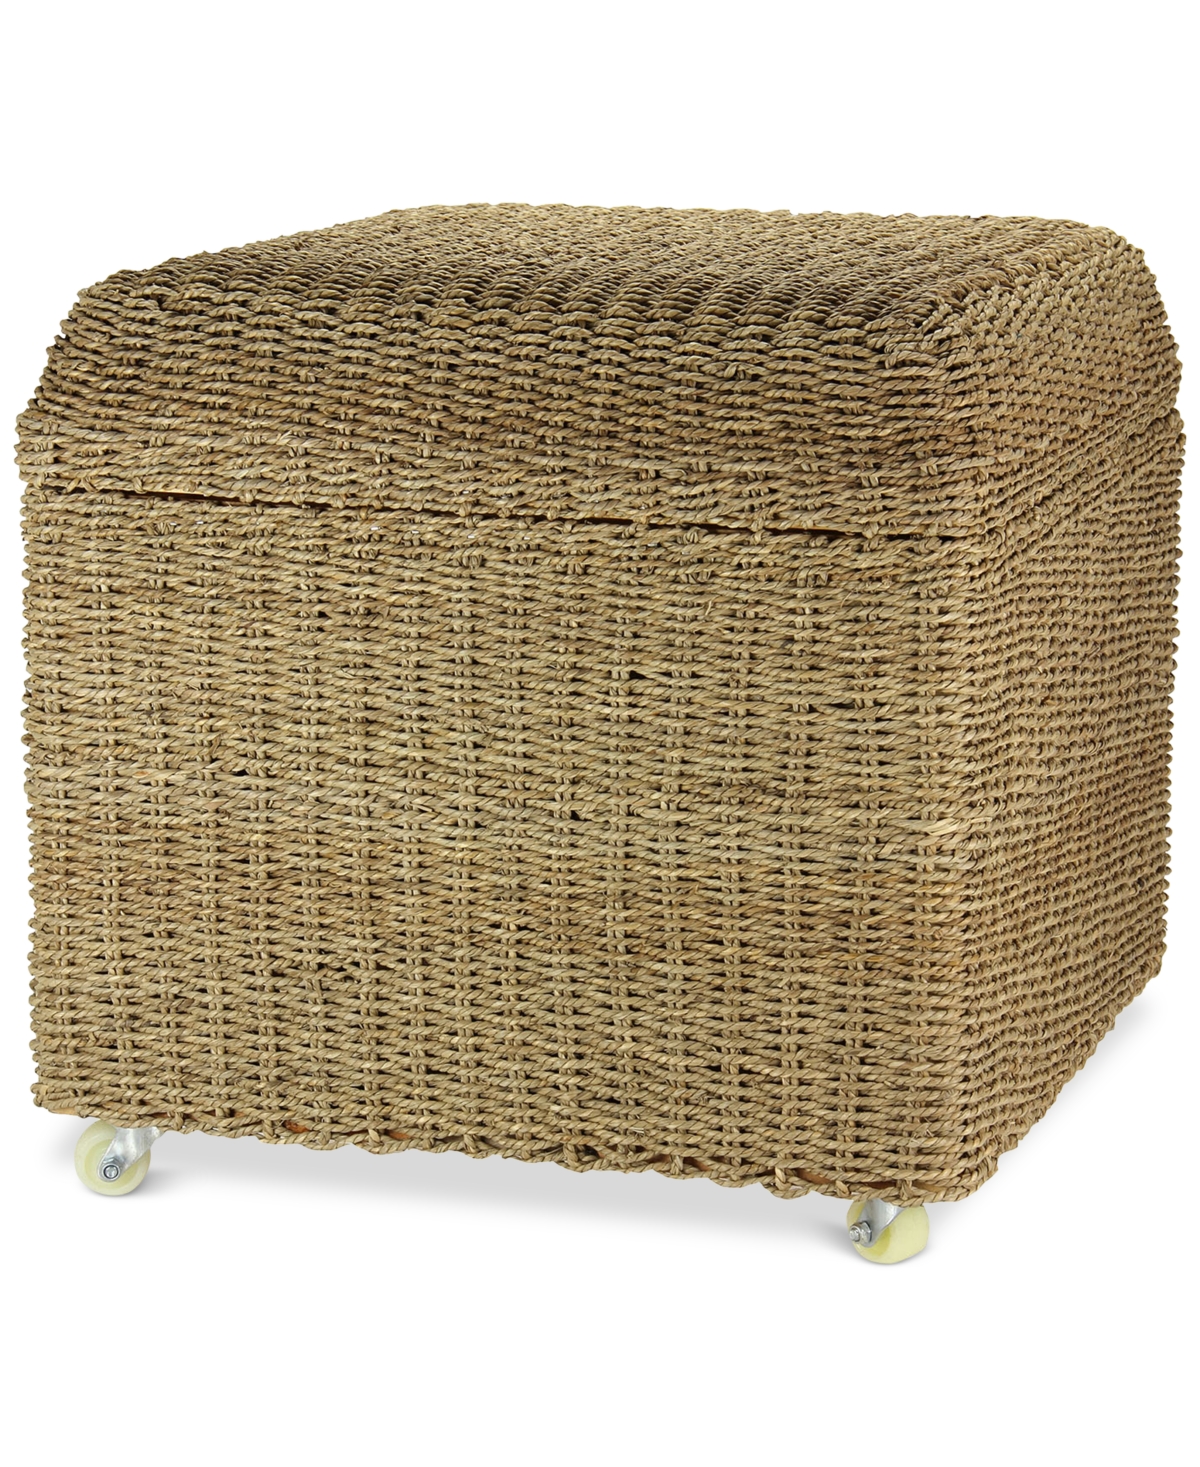 Square Storage Seat with Lid & Rollers - Seagrass